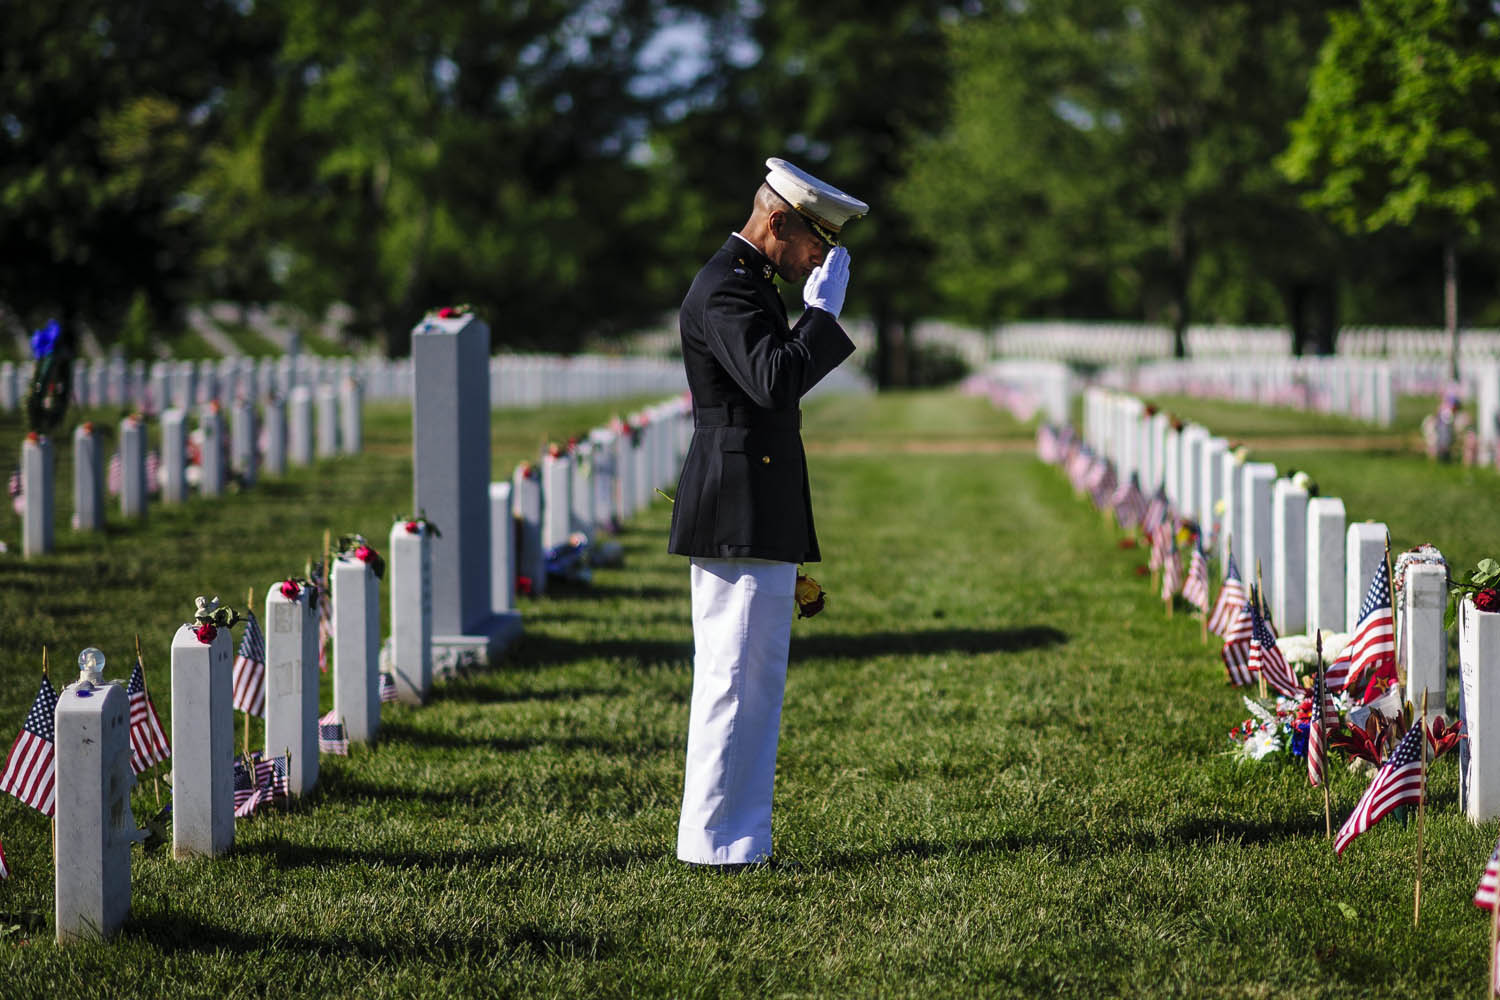 May 27, 2013. Marine Lt. Col. Cal Worth salutes as he visits the grave site of a fallen comrade during a Memorial Day visit to Arlington National Cemetery in Arlington, Virginia.